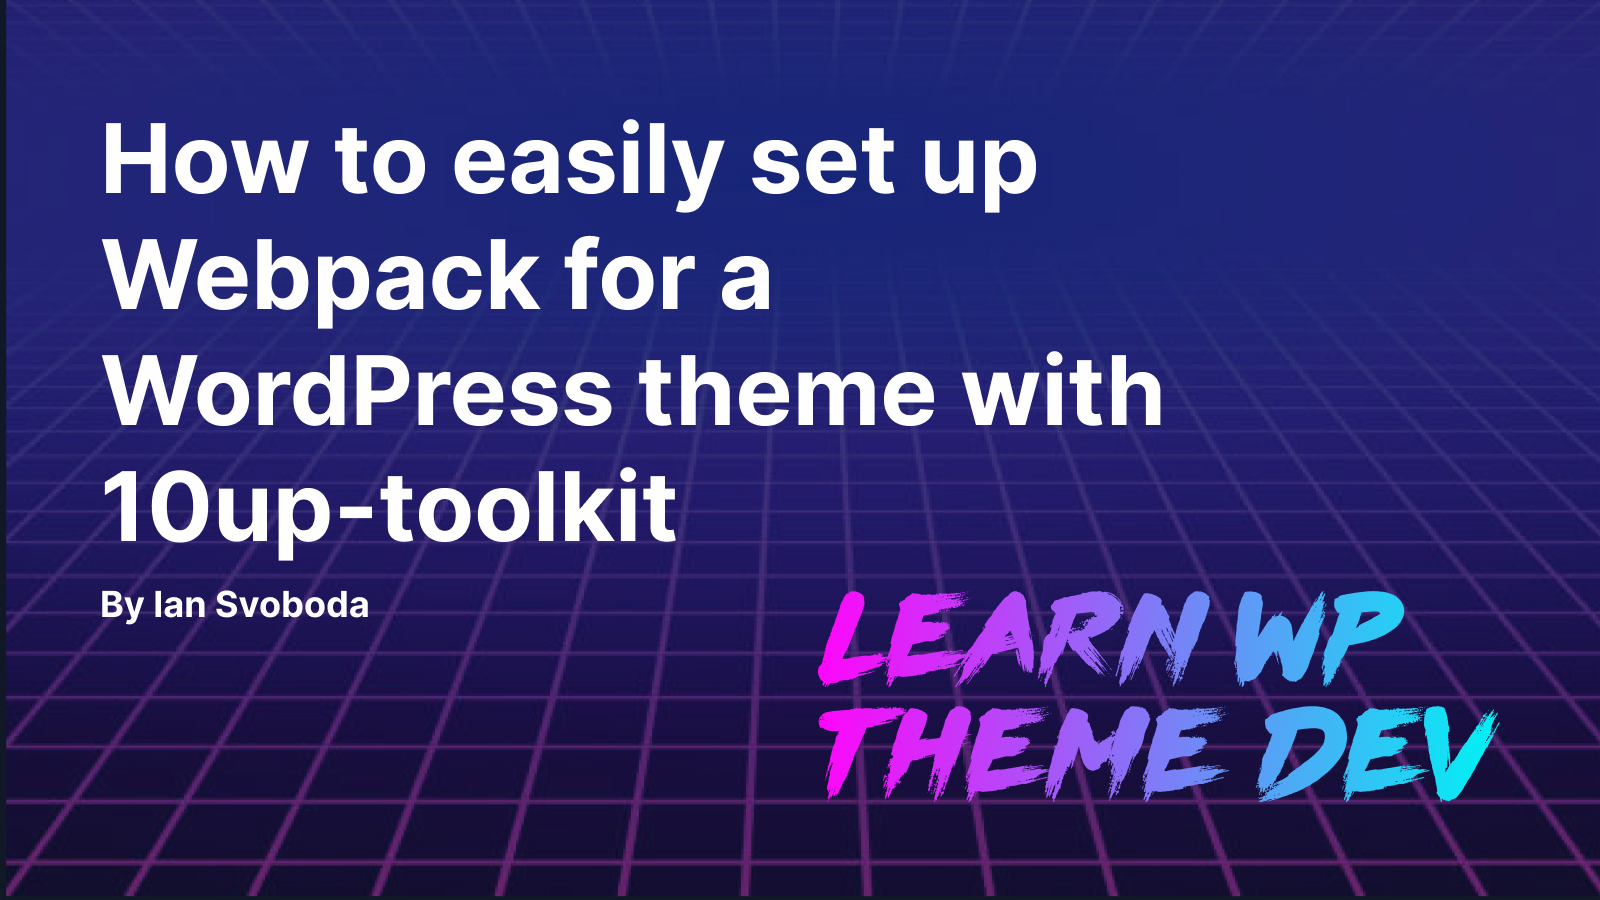 How to easily set up Webpack for a WordPress theme with 10up-toolkit